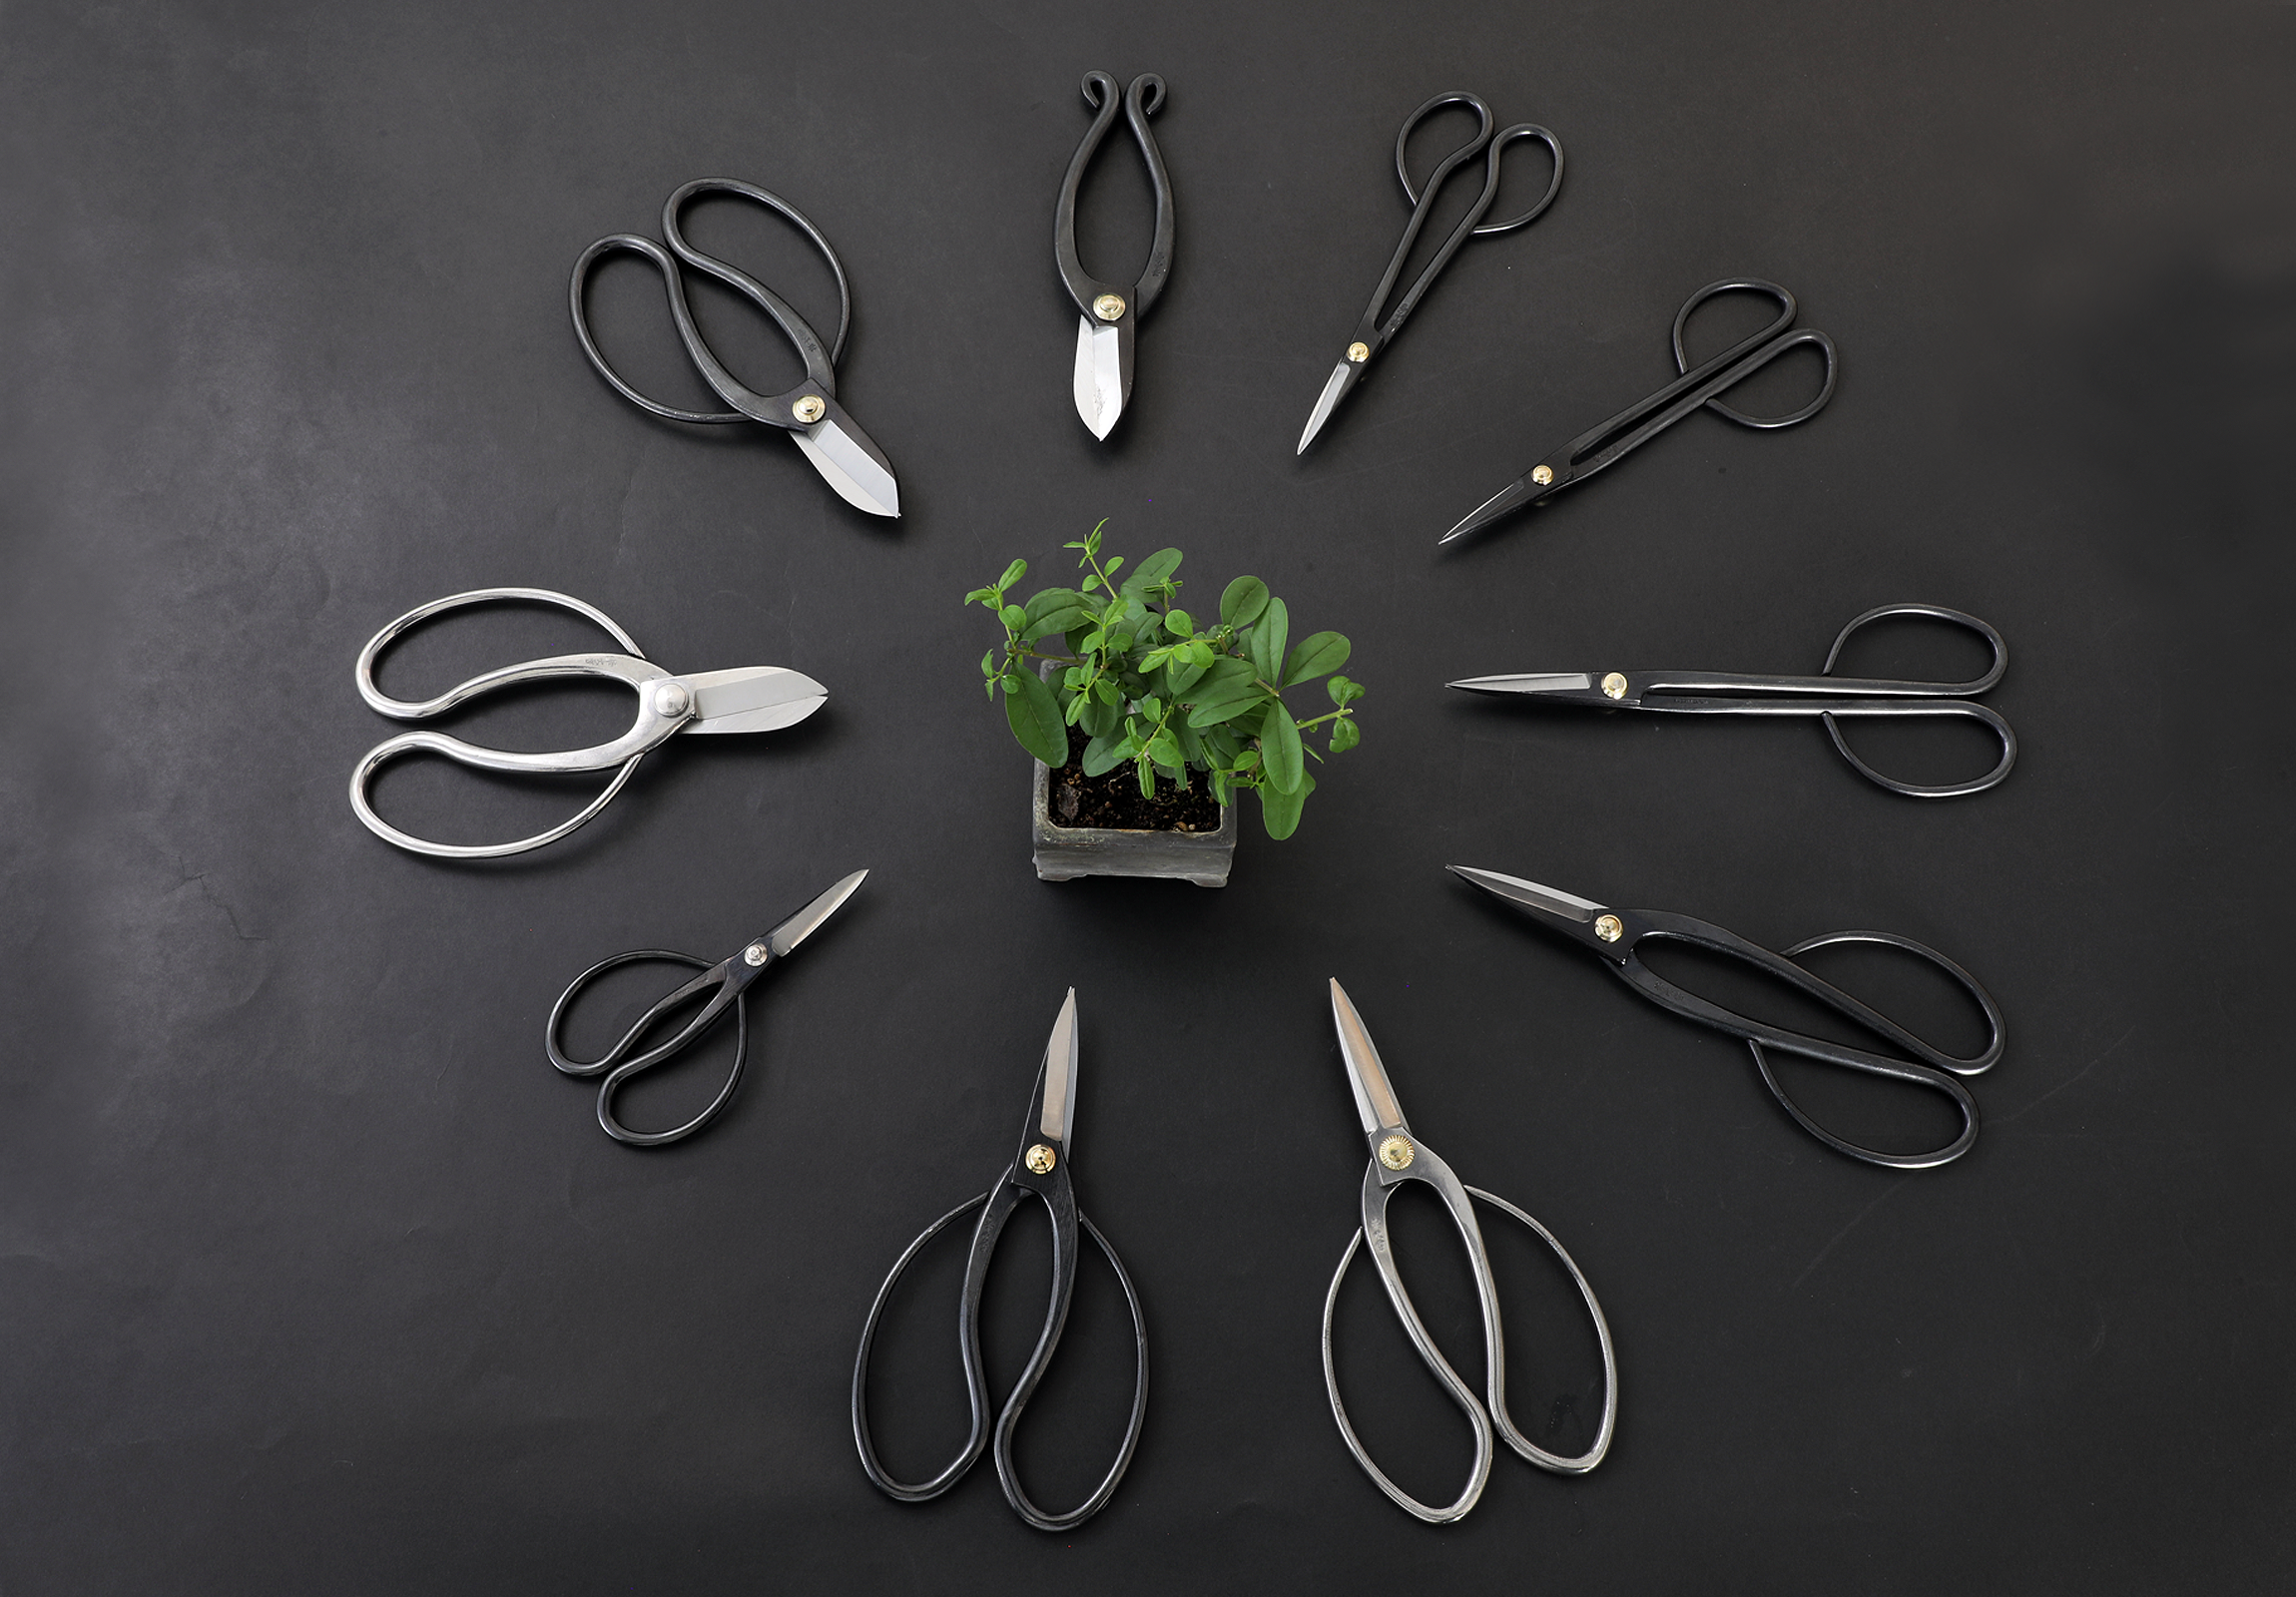 Types of Scissors and Why to Use Each Type - The OT Toolbox